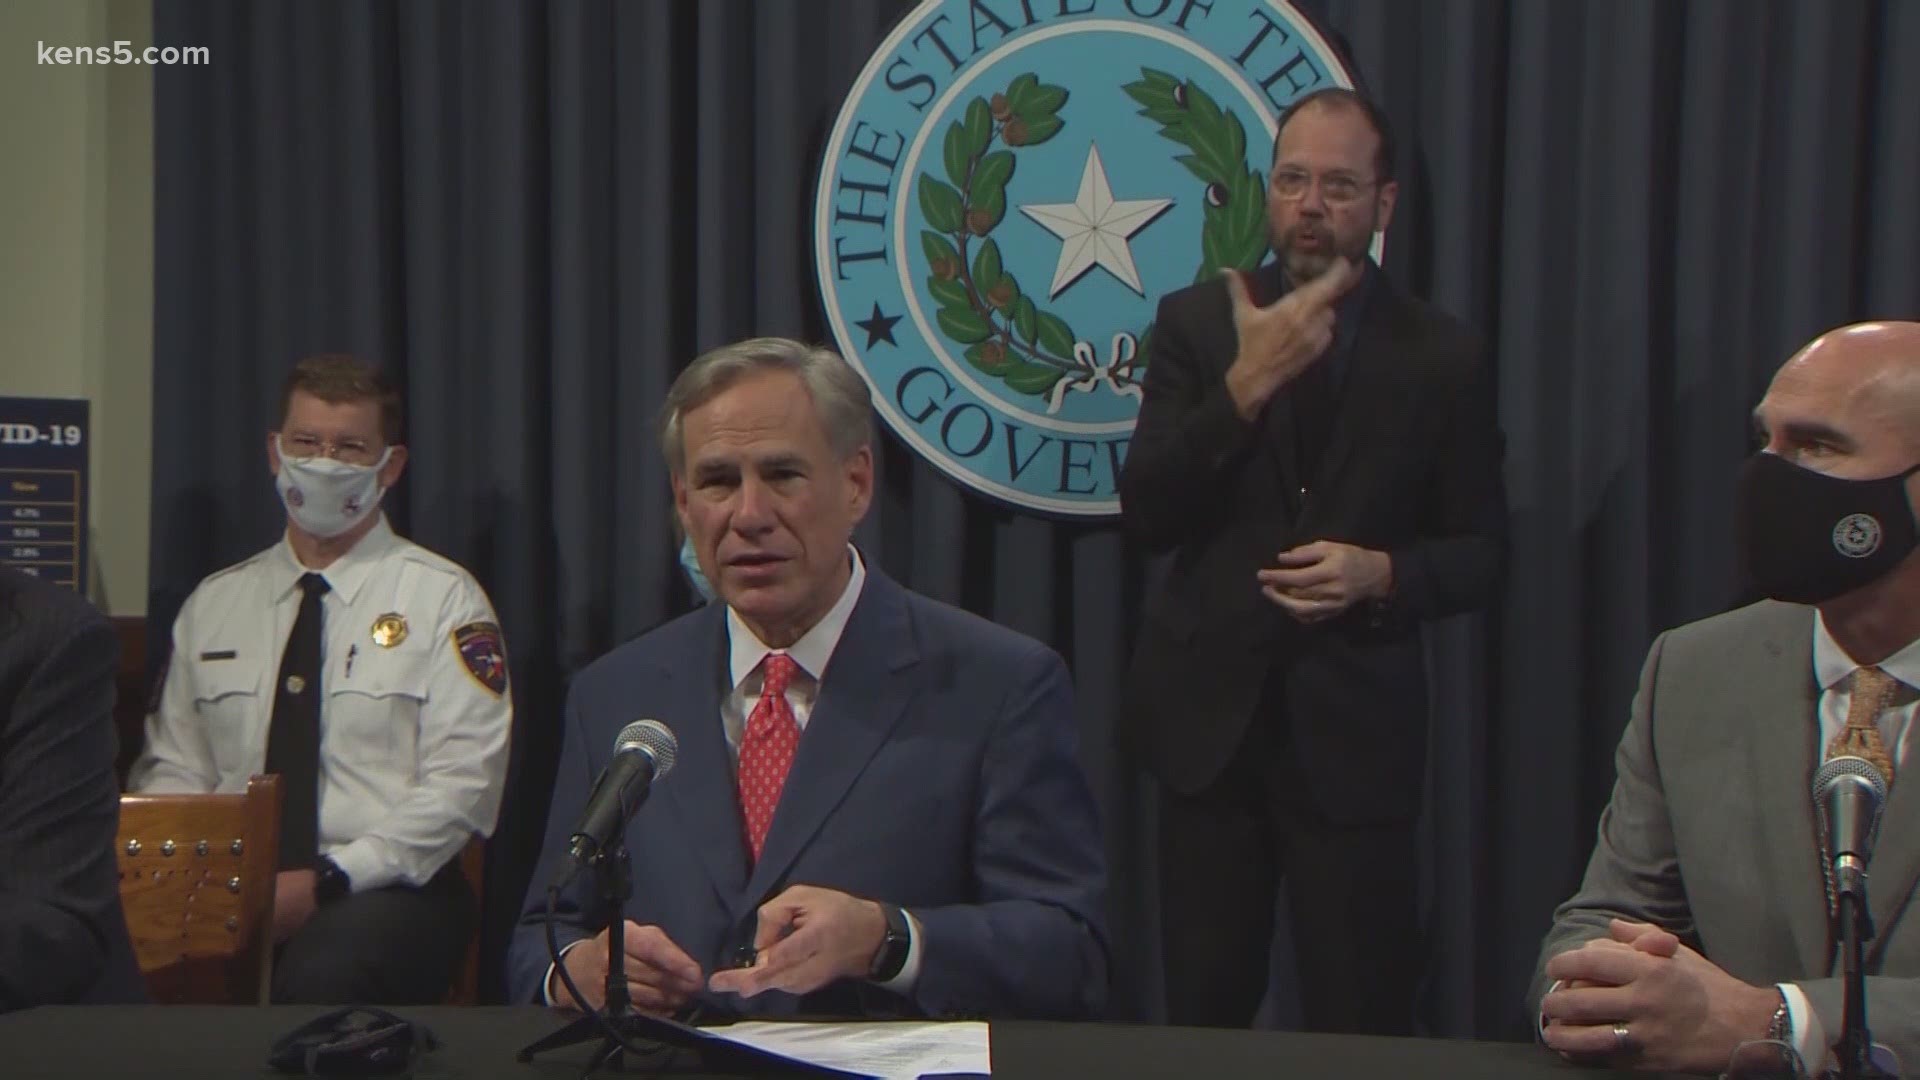 The governor said 19 of the 22 hospital regions in Texas will be allowed to reopen at 75% capacity.